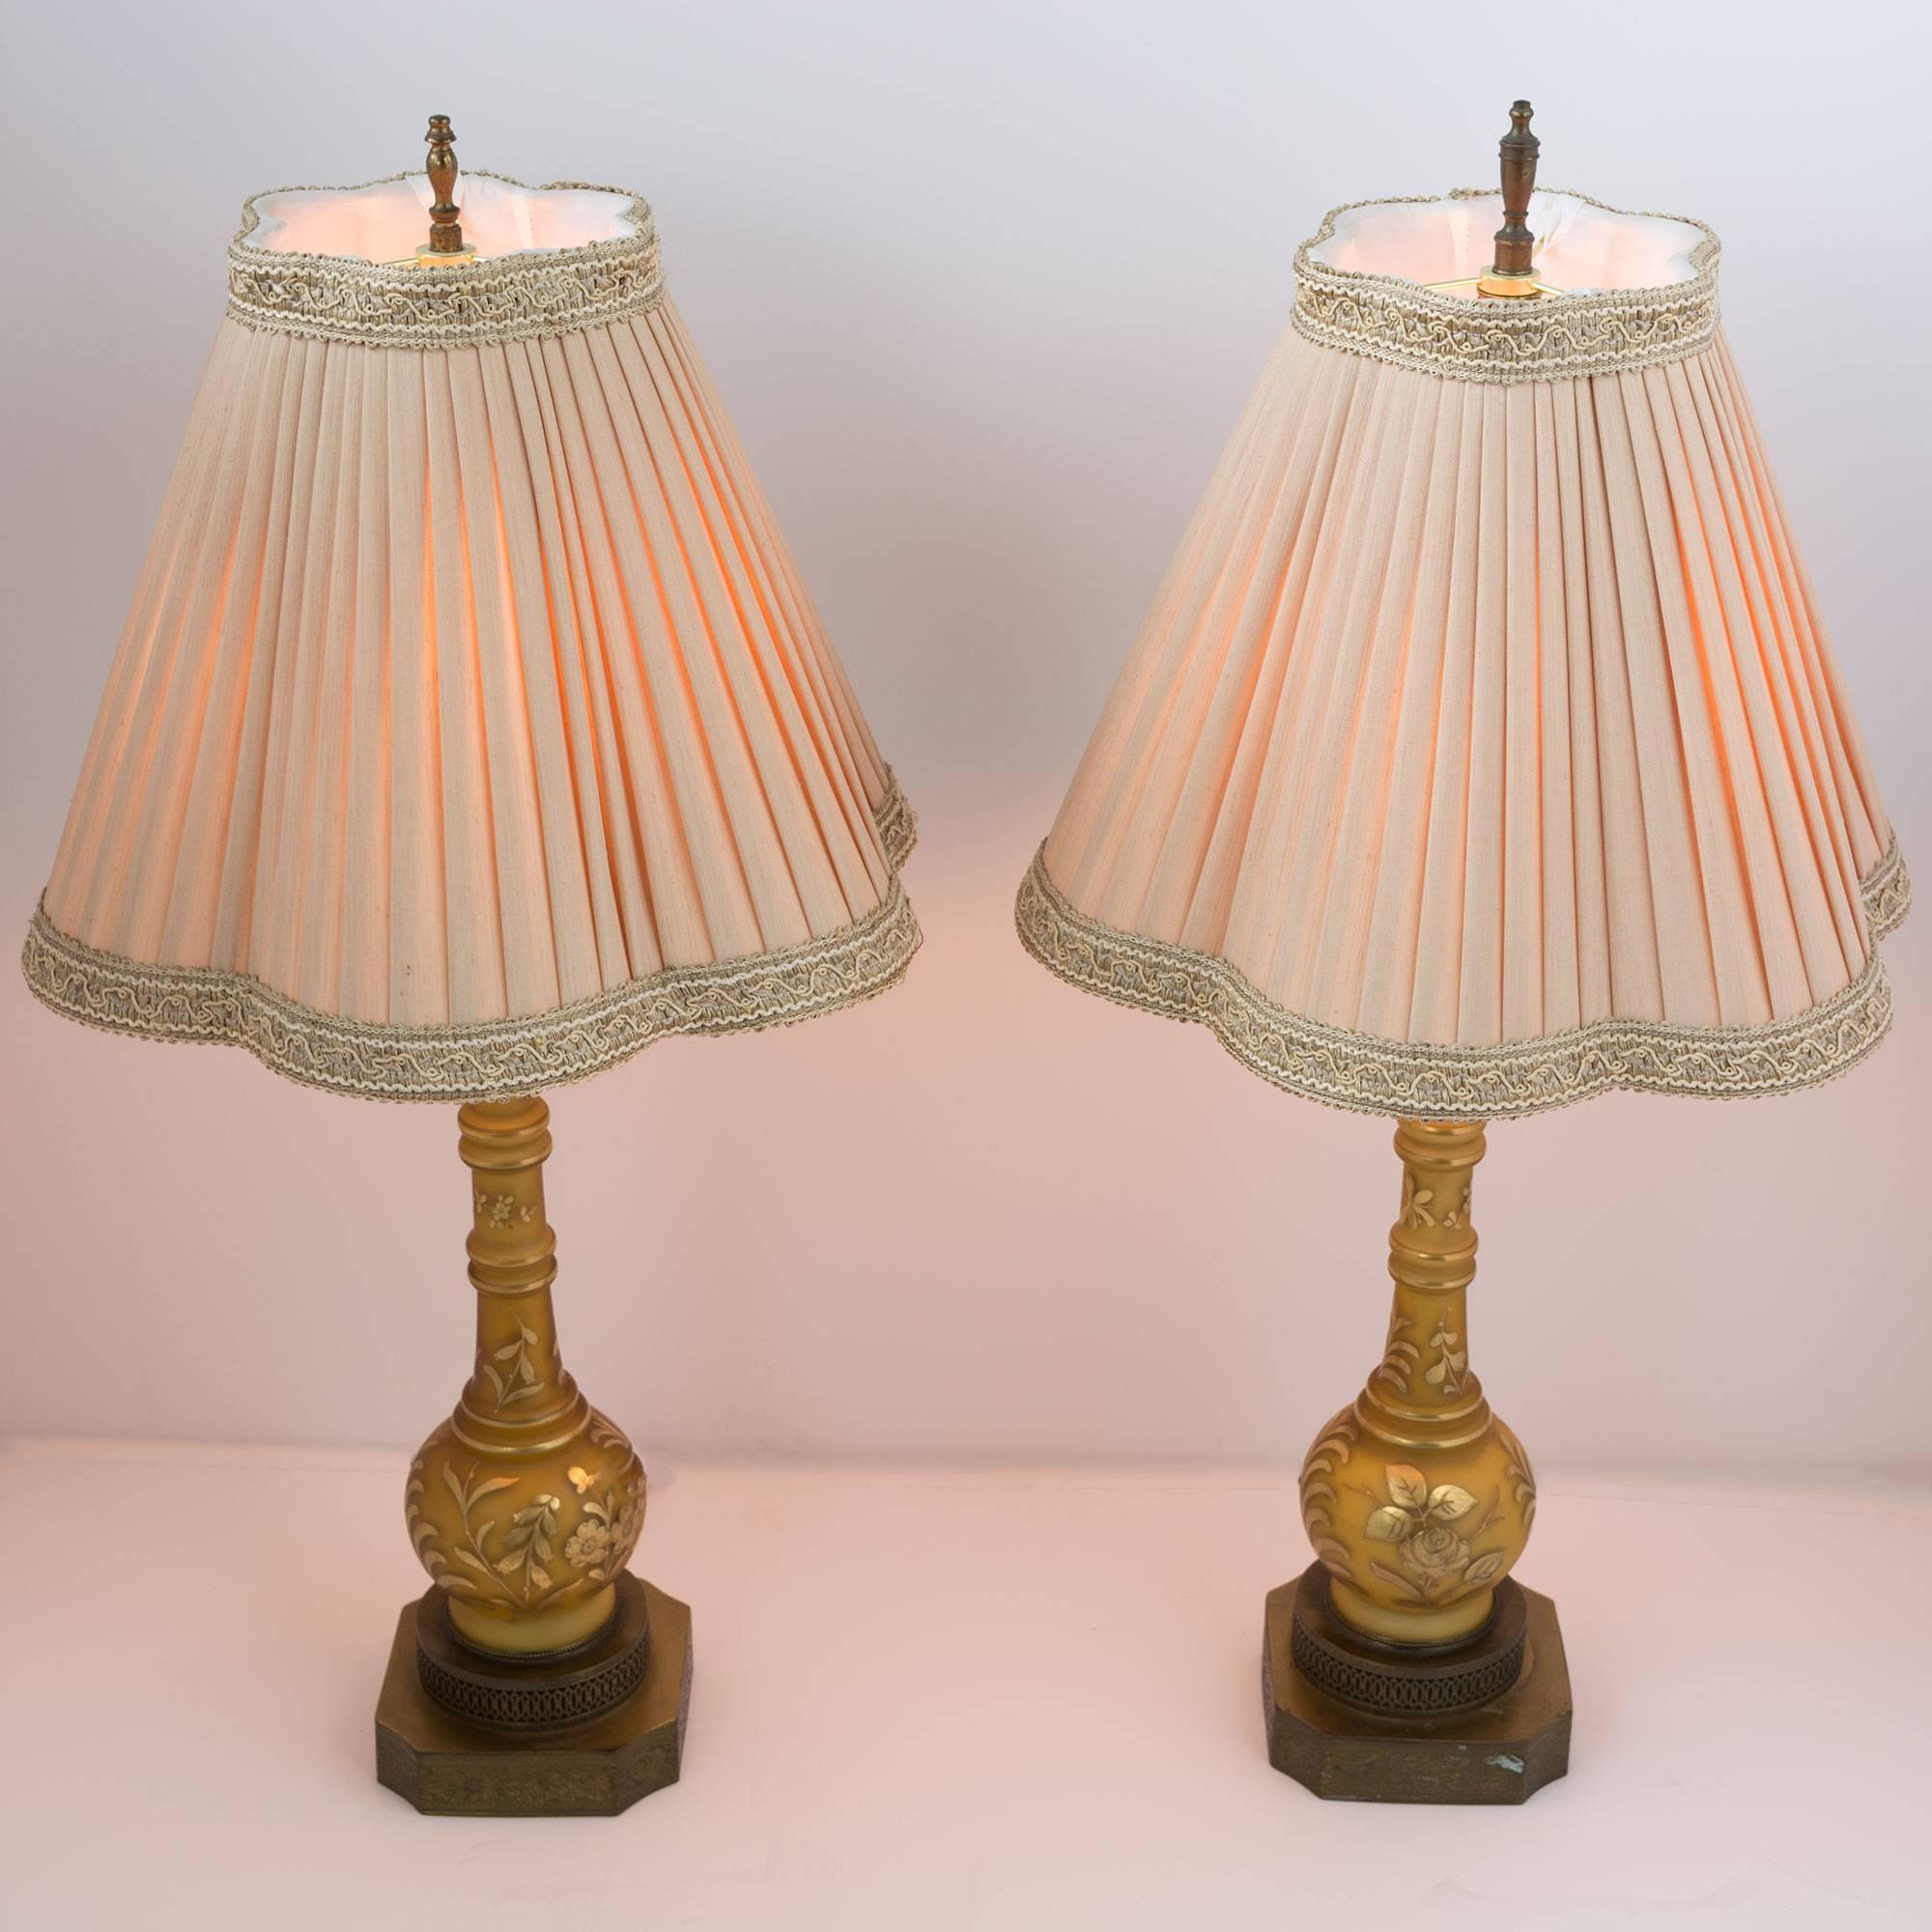 These wonderfully detailed lamps feature square bronze bases with embossed floral and cut metalwork details. The most stunning elements are the raised hand painted cameo style floral design. The shades top off the lamps in a soft pink pleated fabric